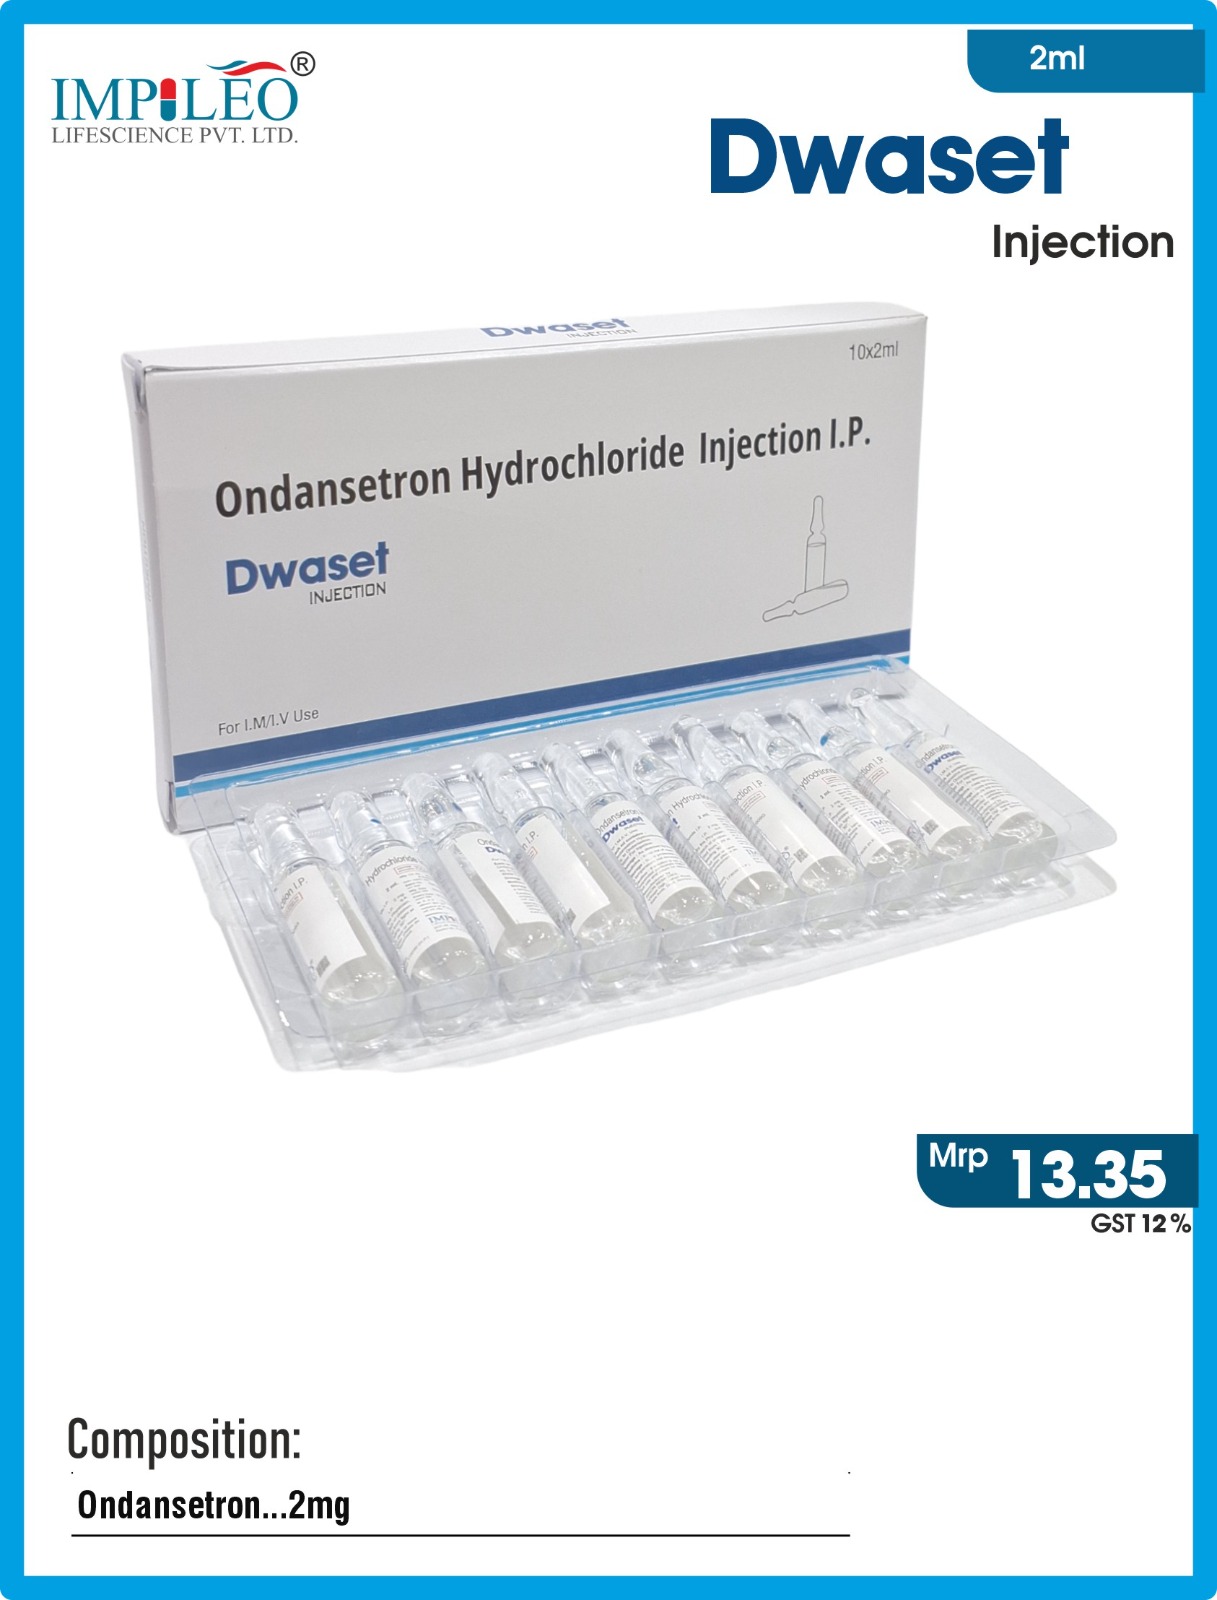 Top PCD Pharma Franchise in Chandigarh Delivers High-Quality DWASET Injection